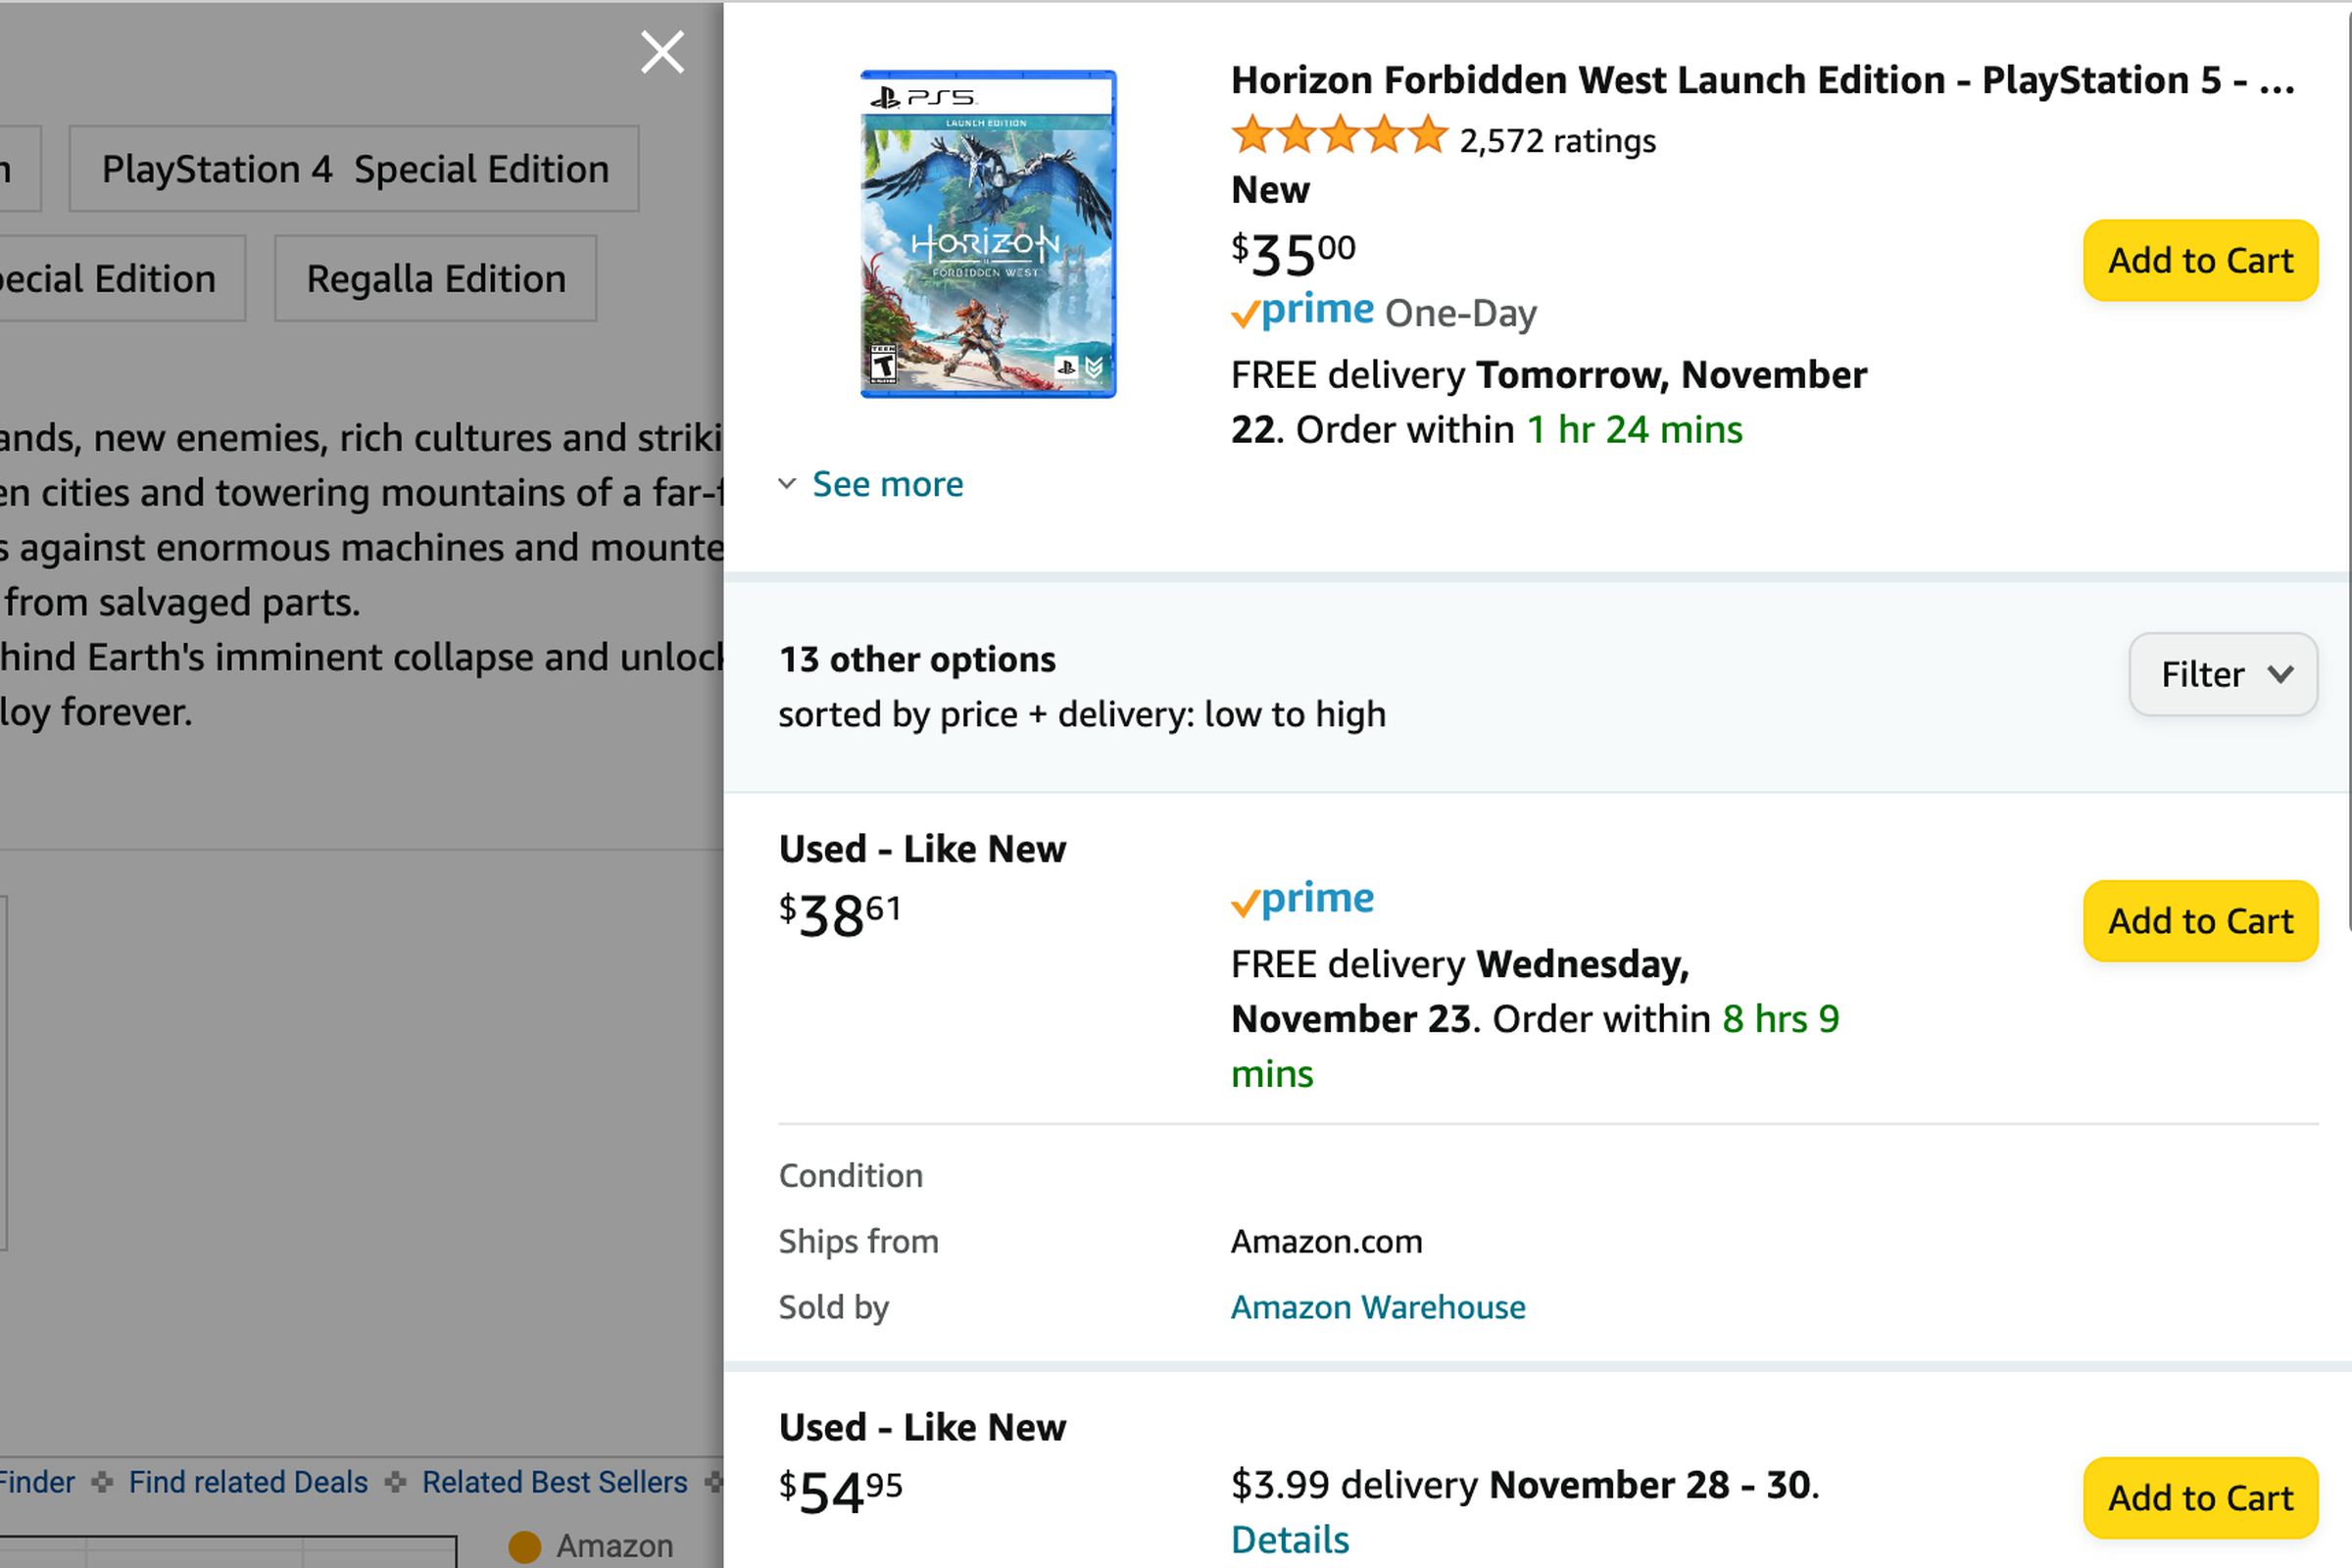 Amazon Warehouse’s refurbished or used options are usually located at the top of the “New & Used” offers.